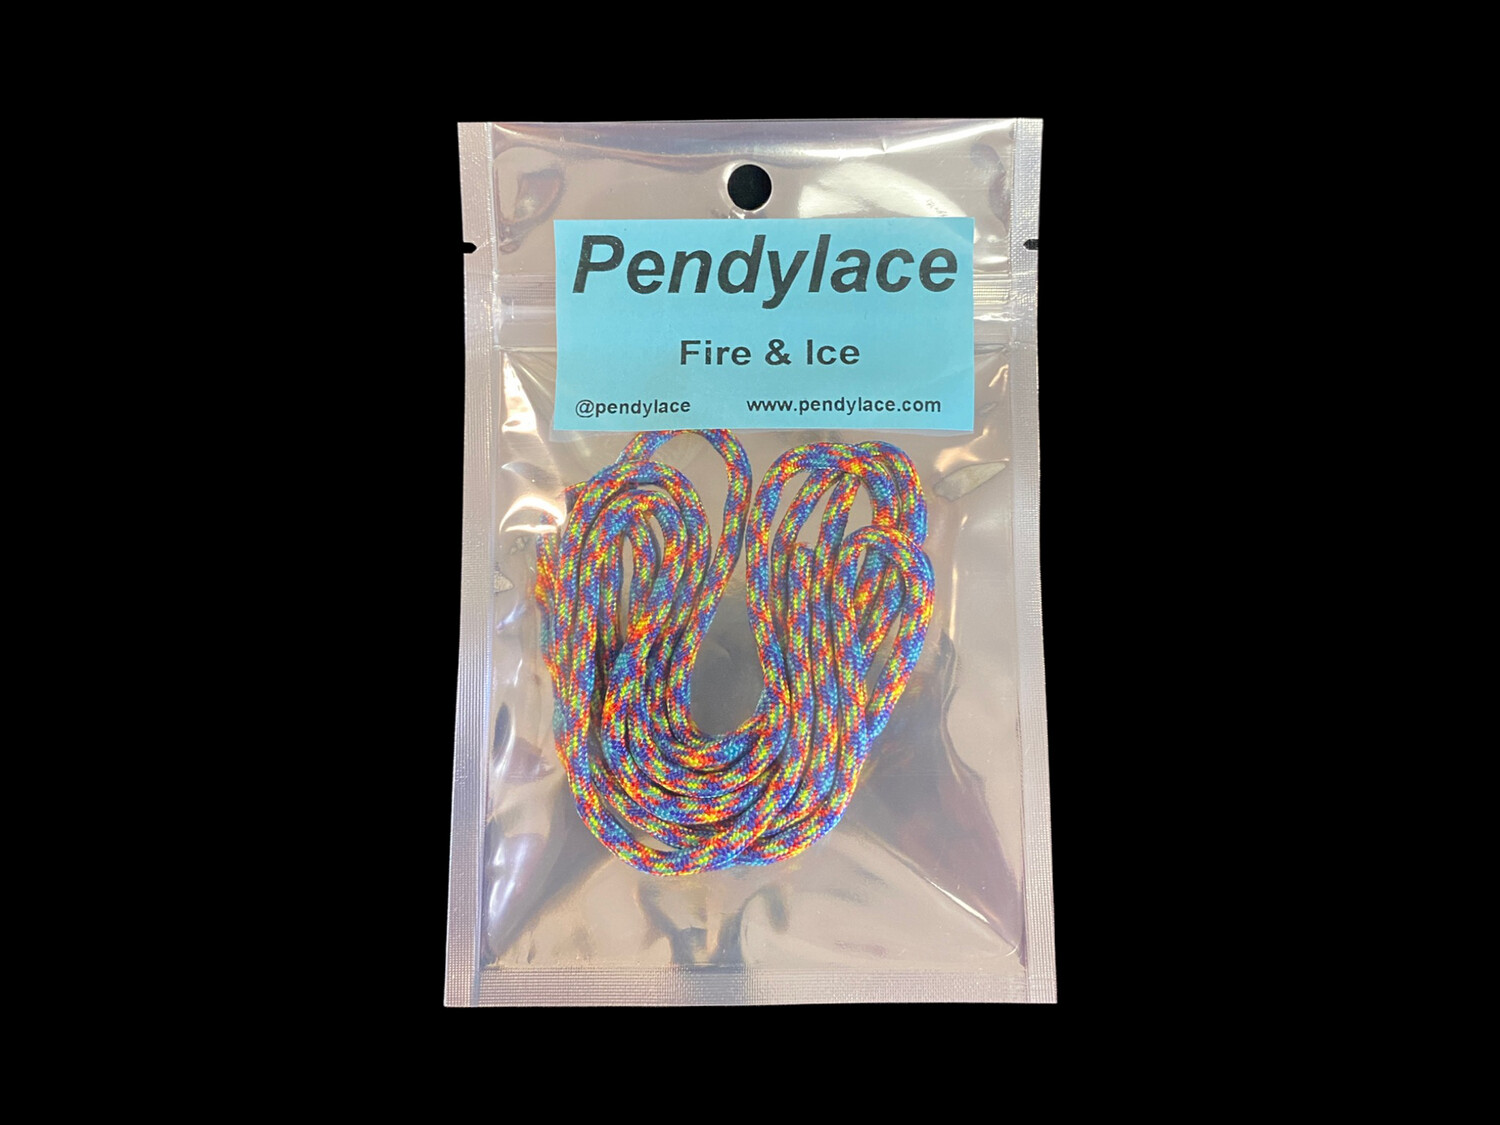 Pendy Lace - Fire & Ice